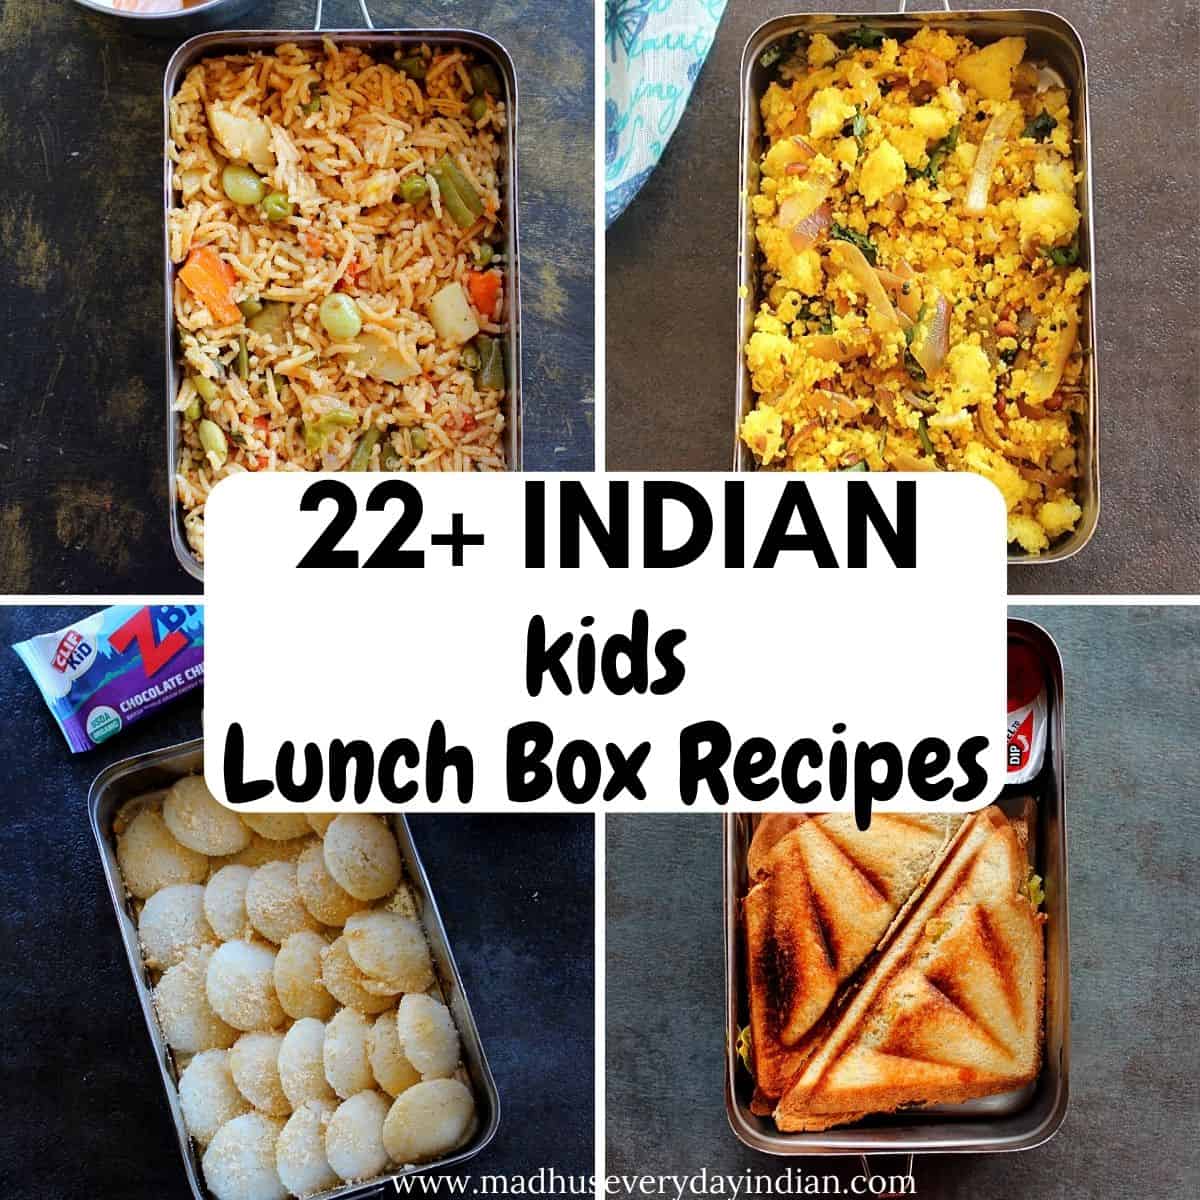 51 Easy Lunch Box Ideas for Kindergarten Kids - All Nutritious